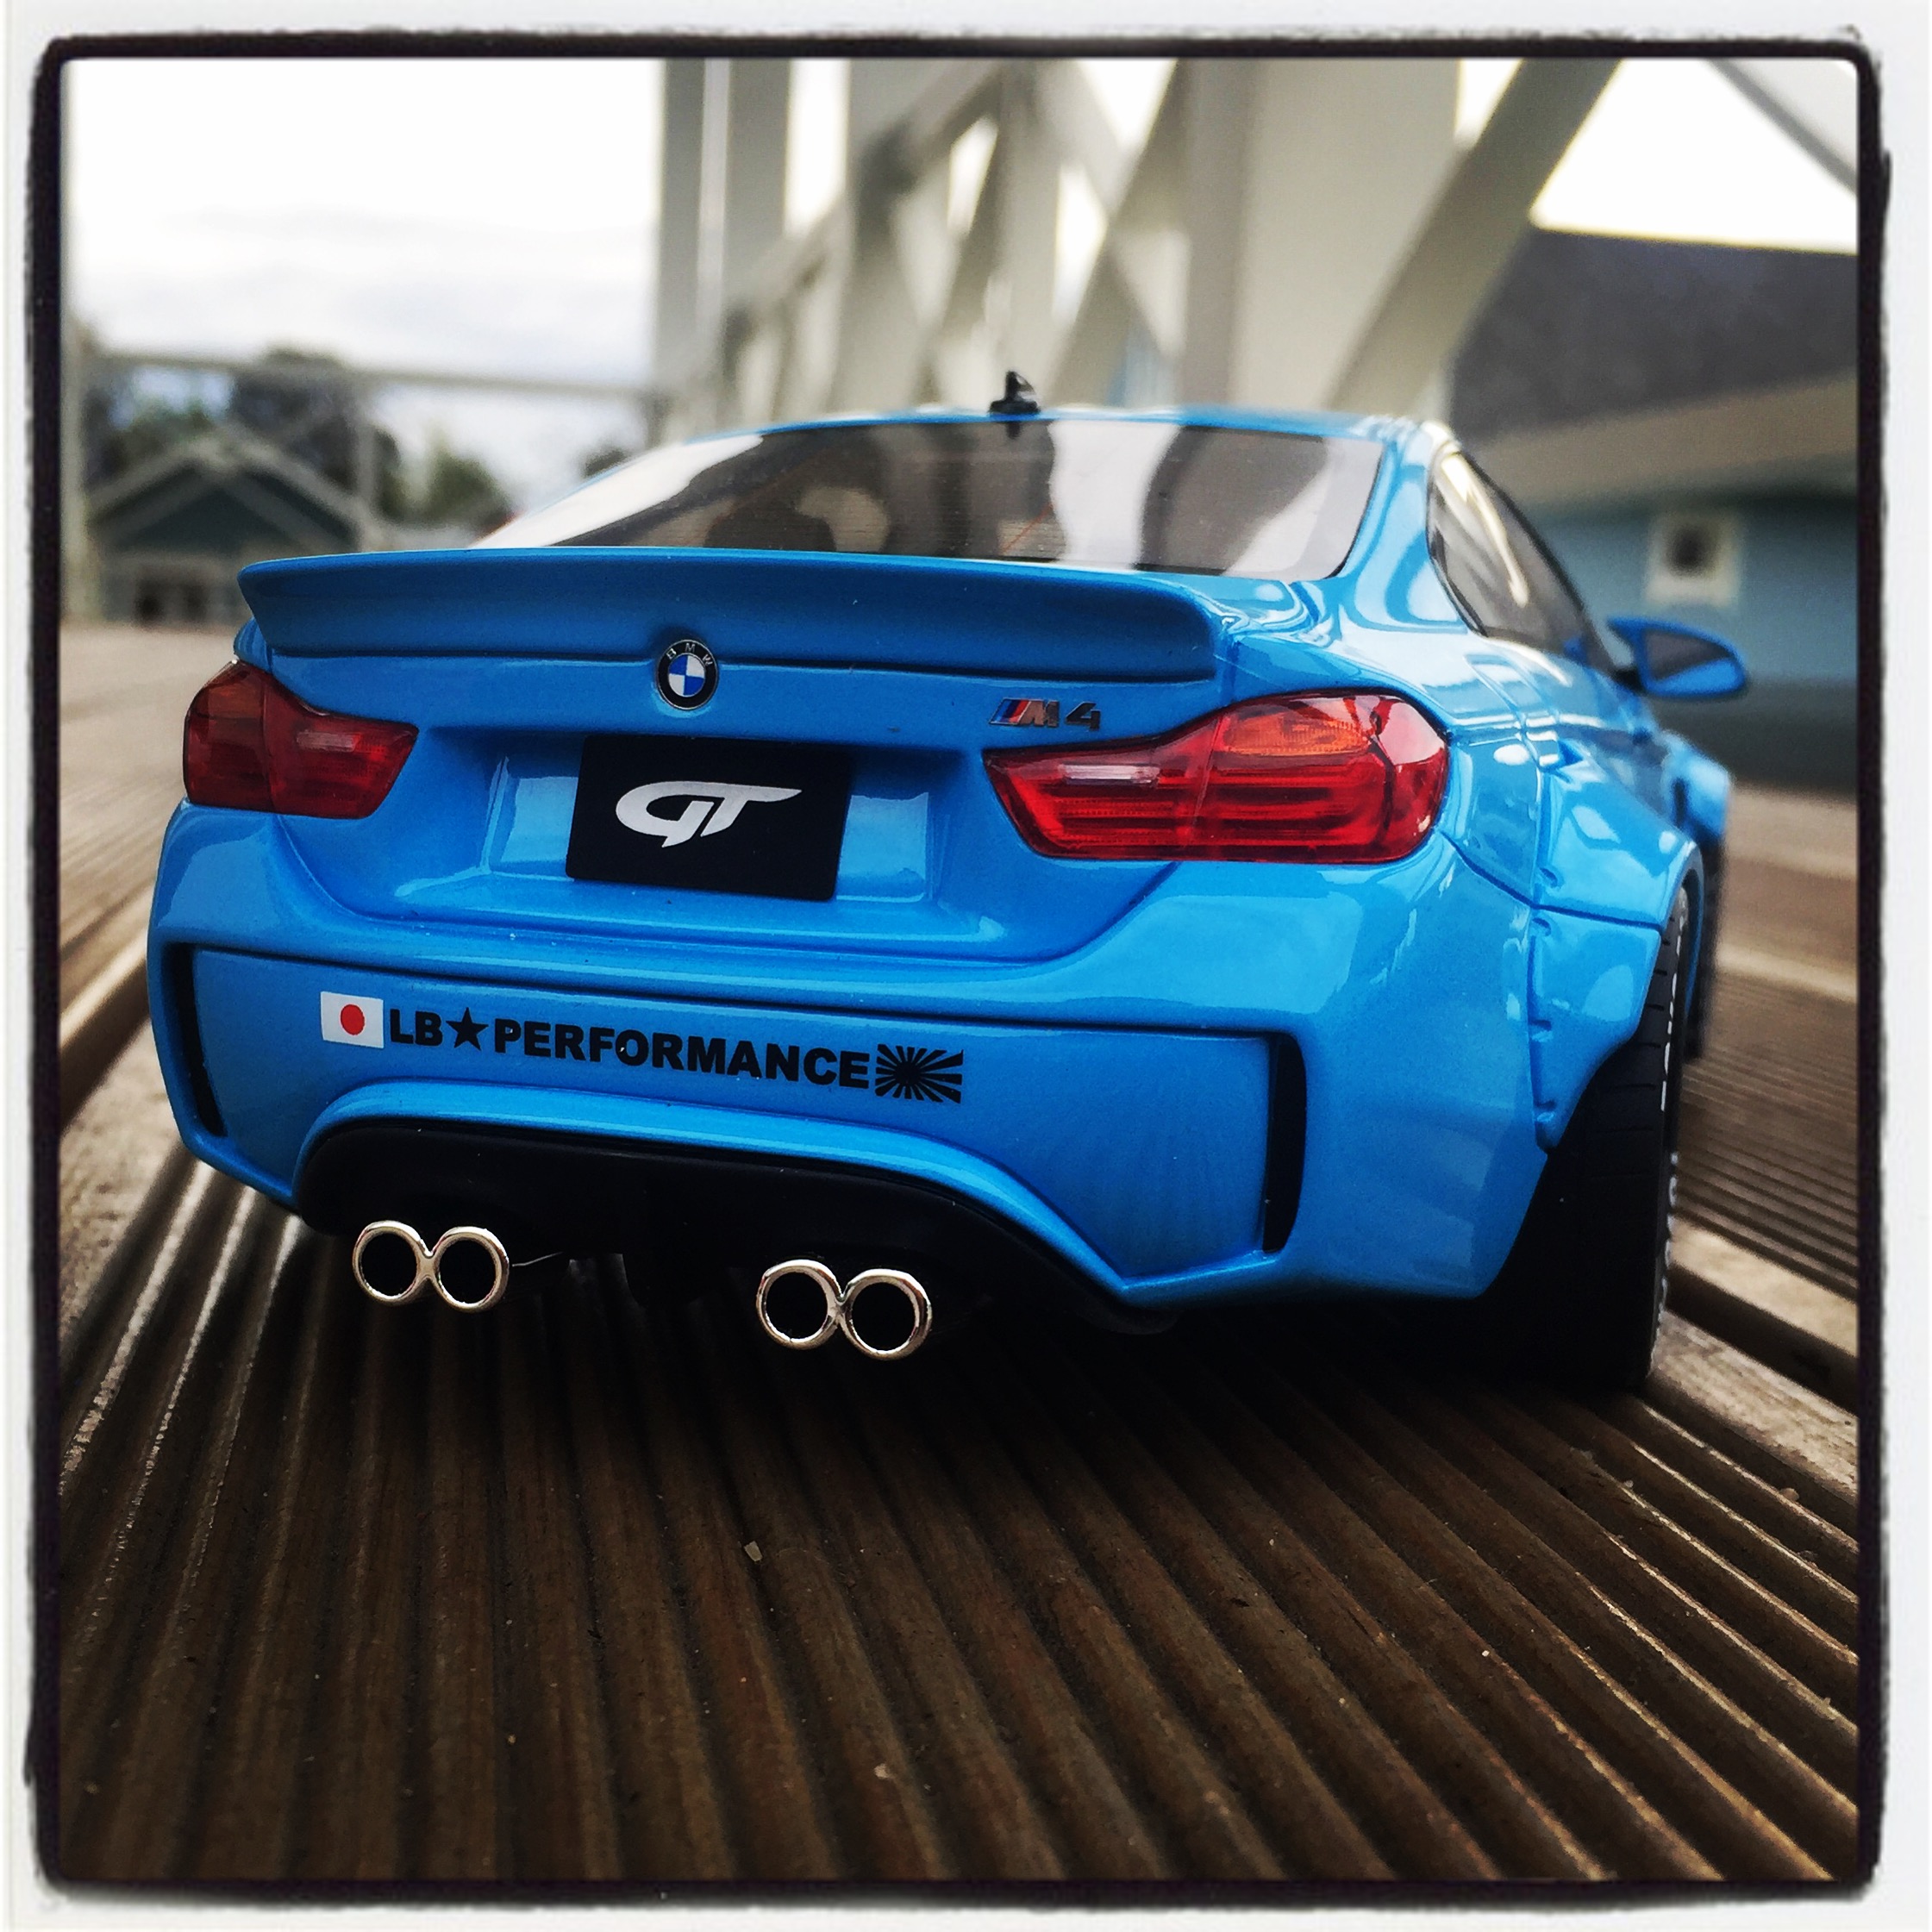 BMW M4 (F82) Liberty walk perfomance, light blue, special edition for Japan, le 321 of 504pcs. (gt spirit)